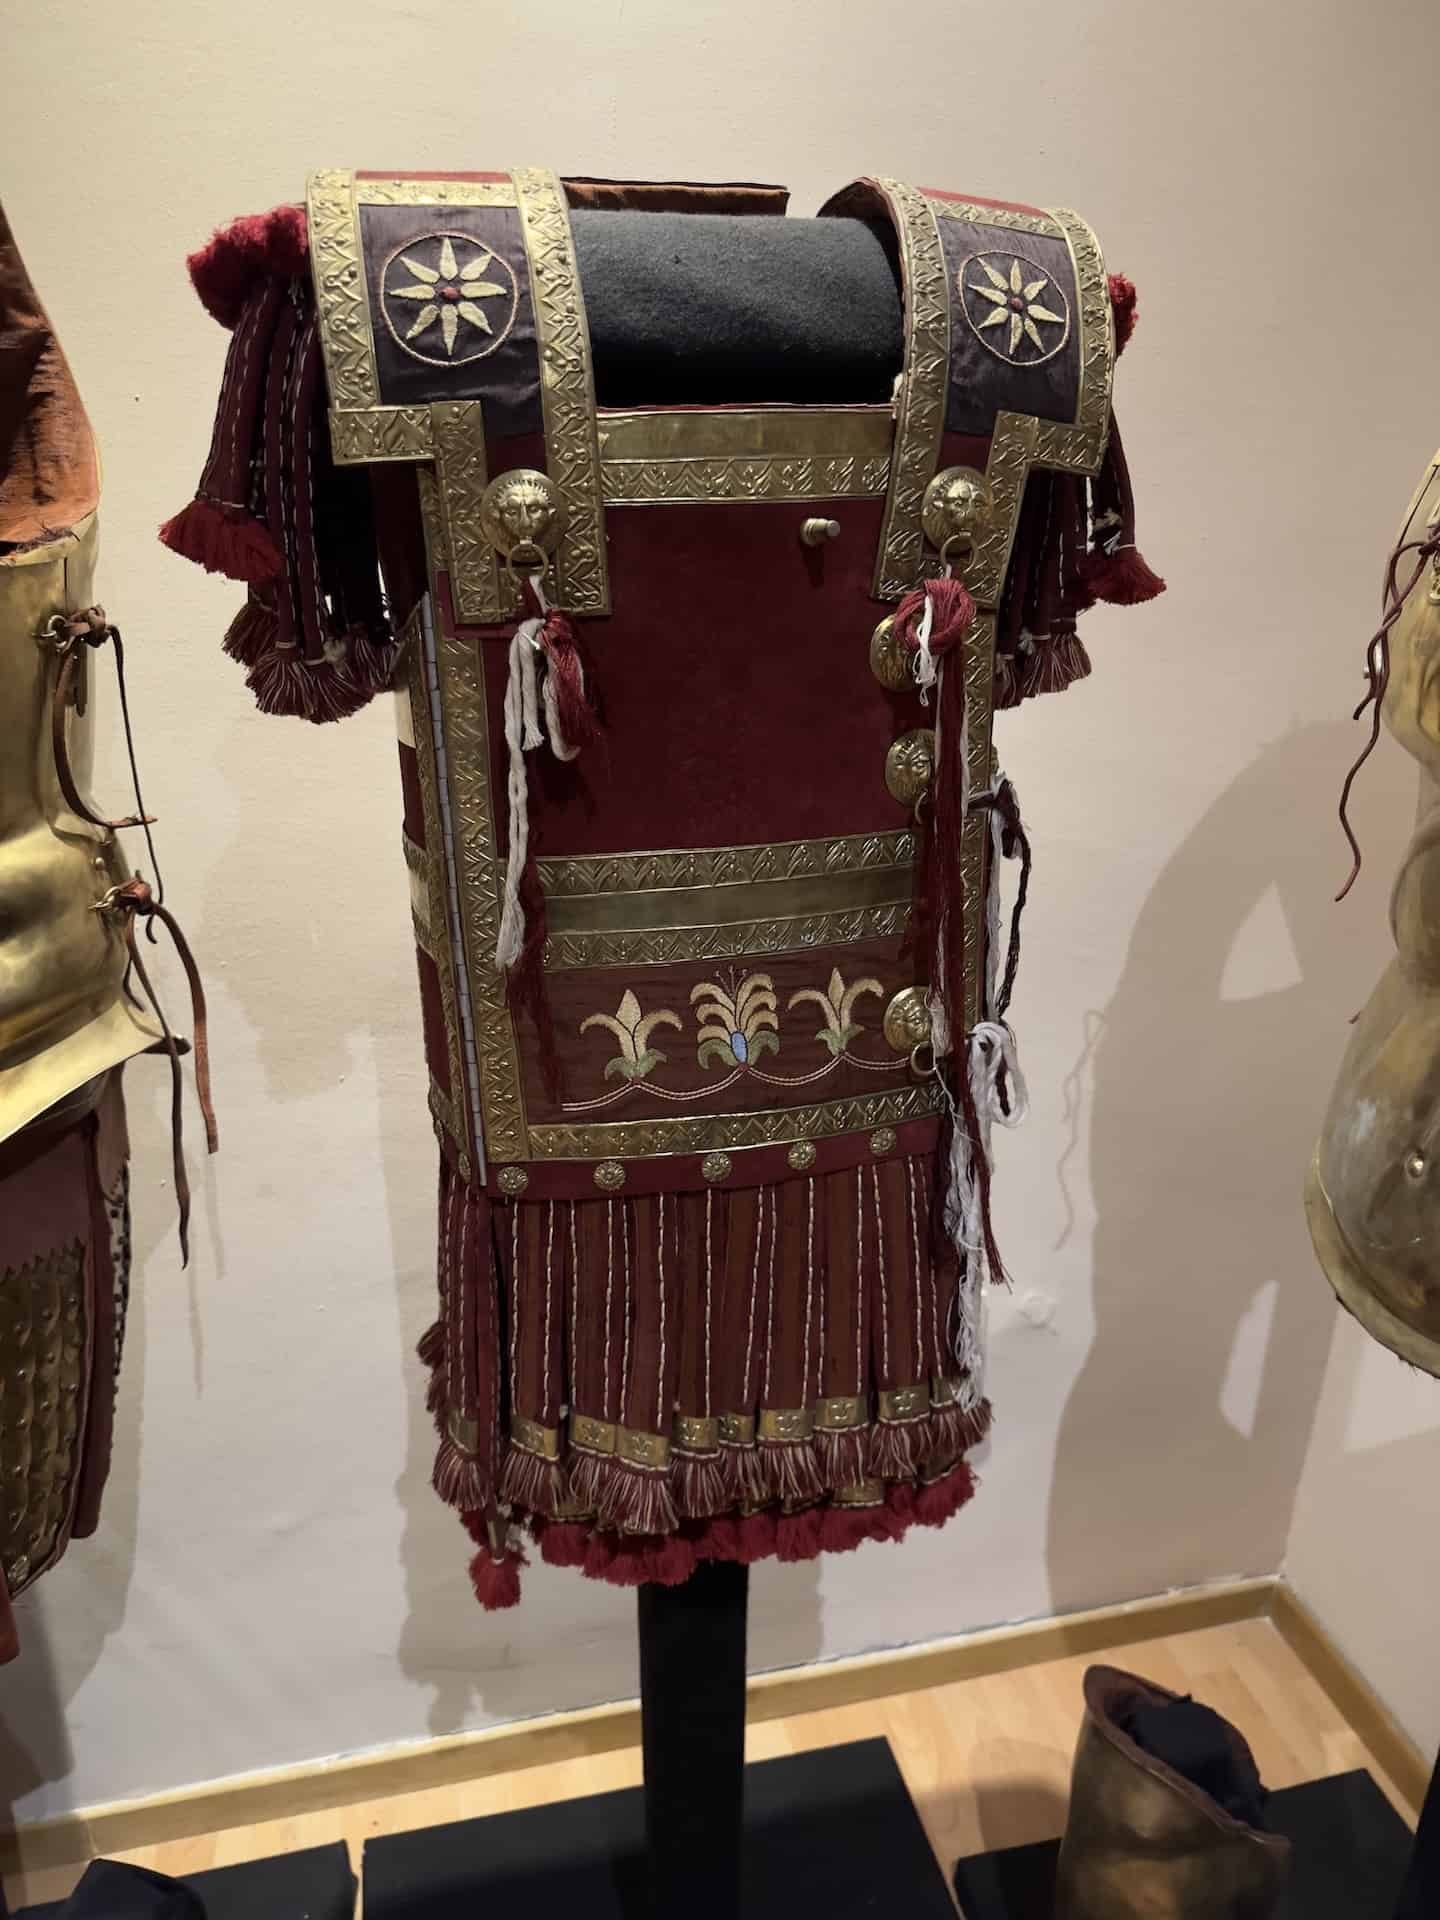 Cuirass of Phillip Il of Macedon, 4th century BC at the Museum of Ancient Greek Technology in Athens, Greece